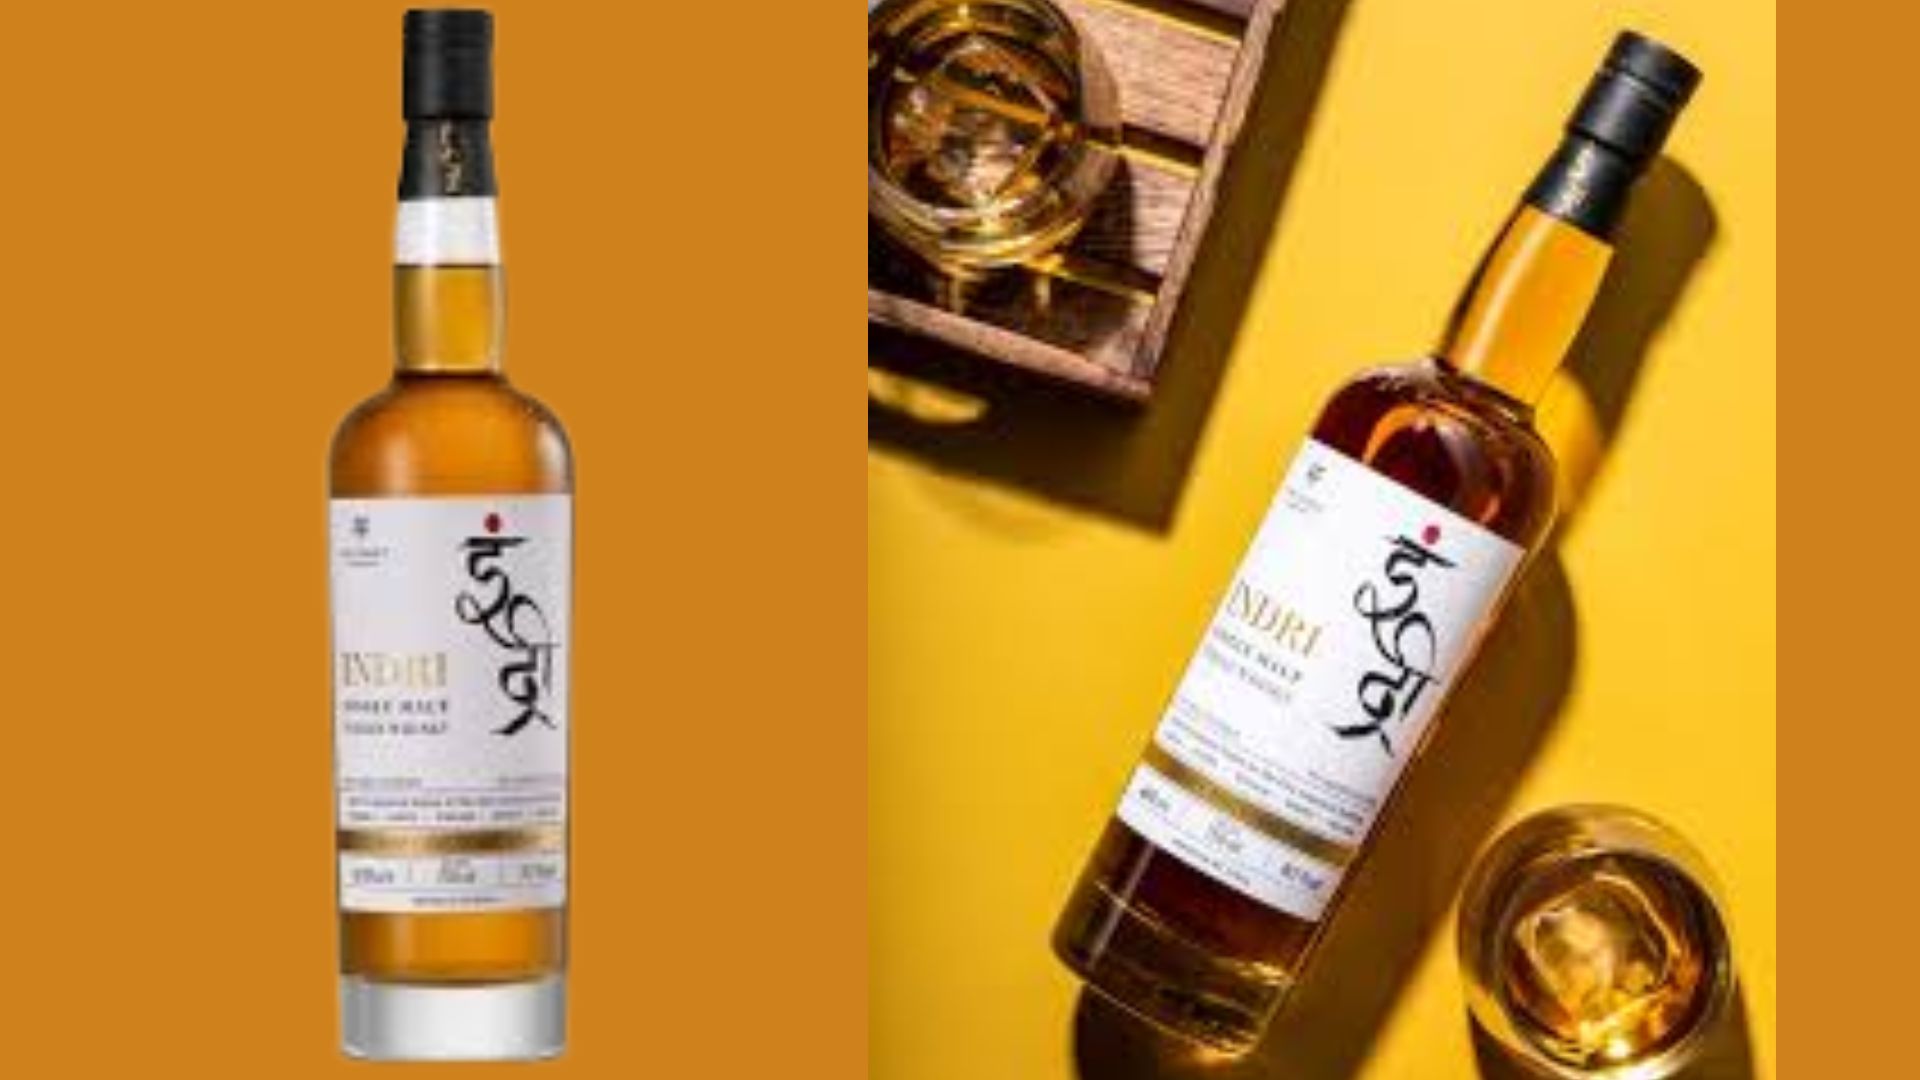 Indri single malt whisky emerges as fastest growing brand globally